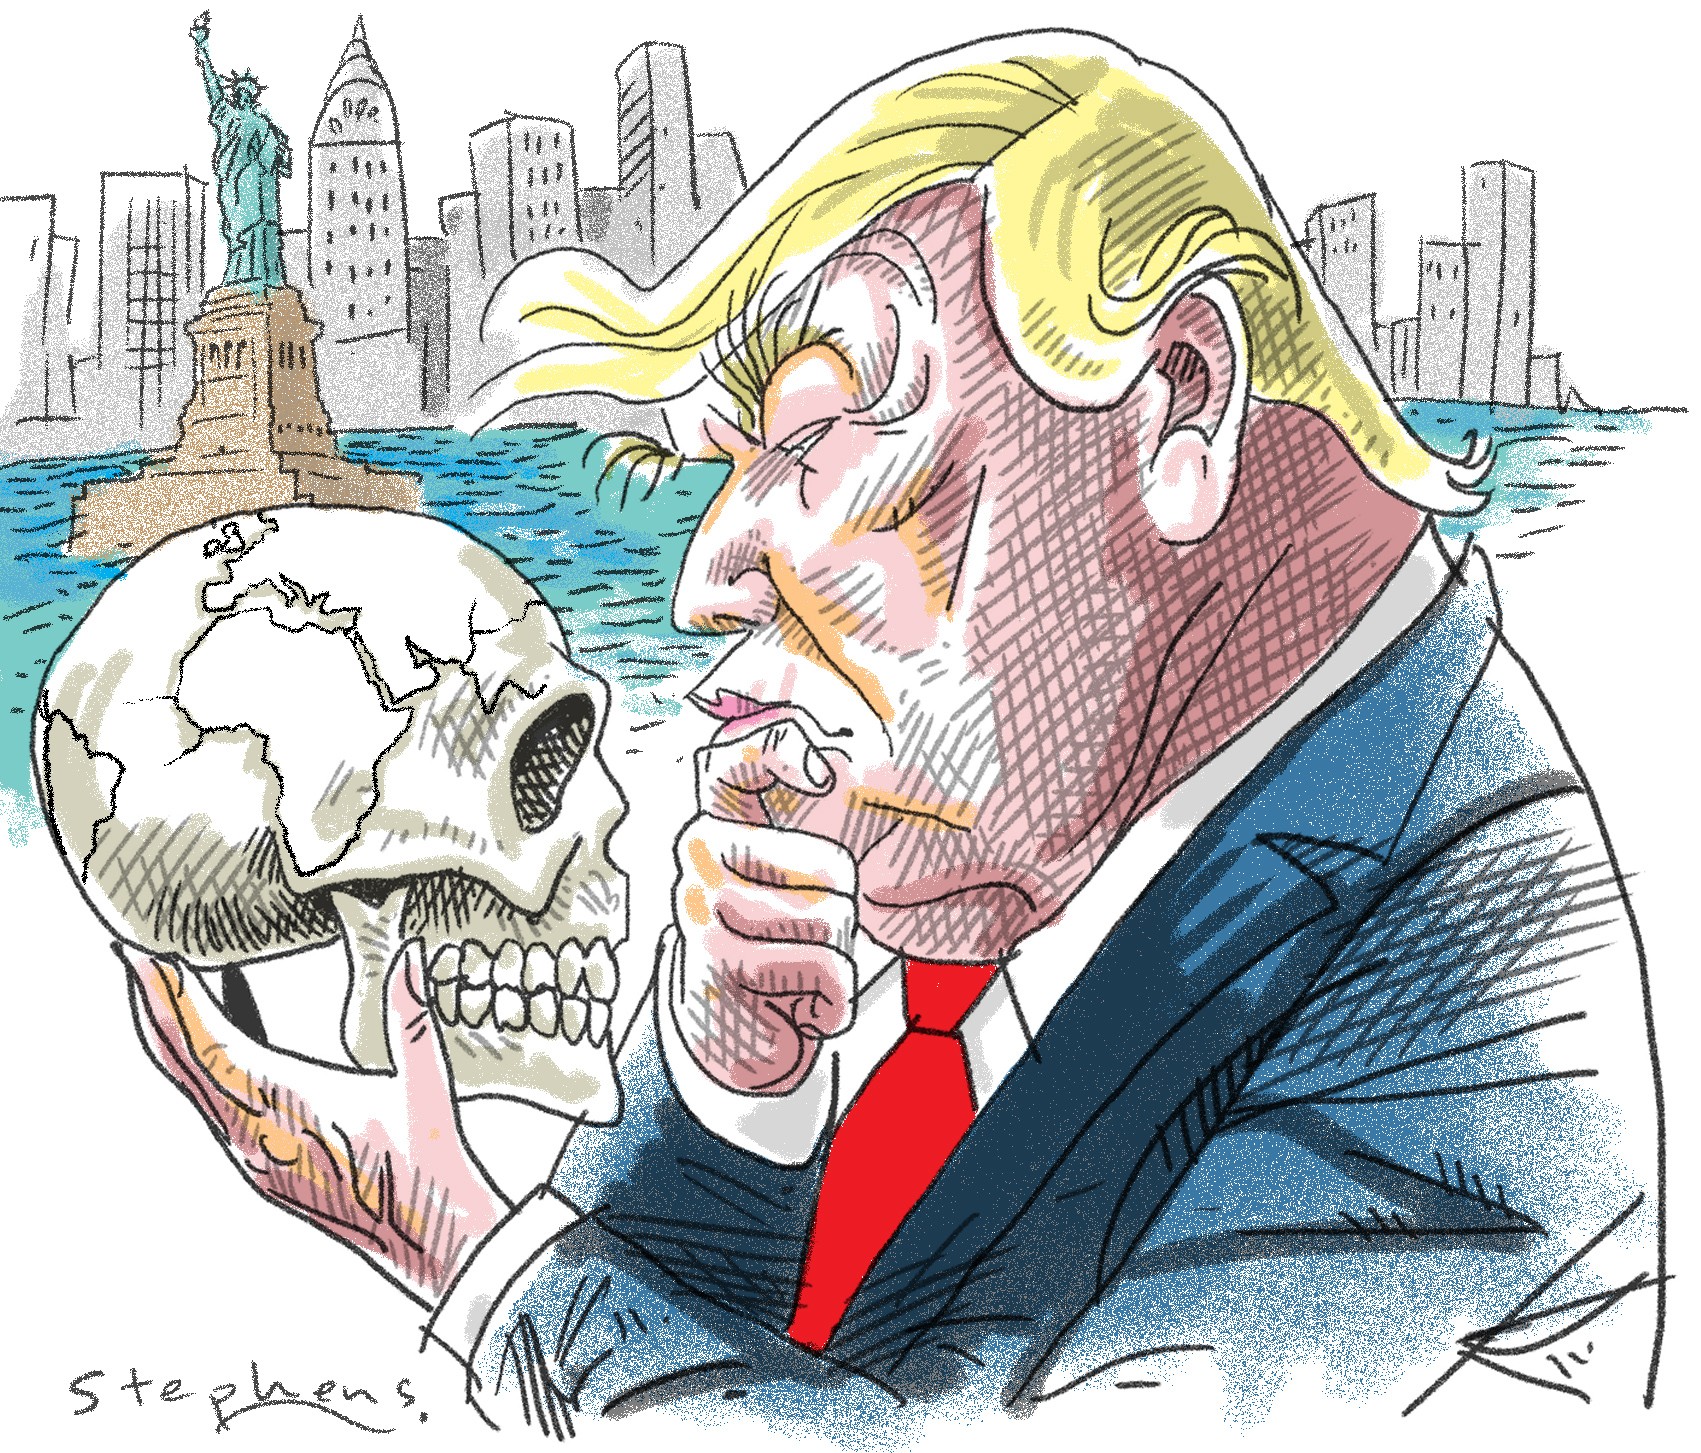 Louis René Beres says Donald Trump’s lamentable failure to recognise the mutual interdependence of American and global survival makes US foreign policy a hazard to the world